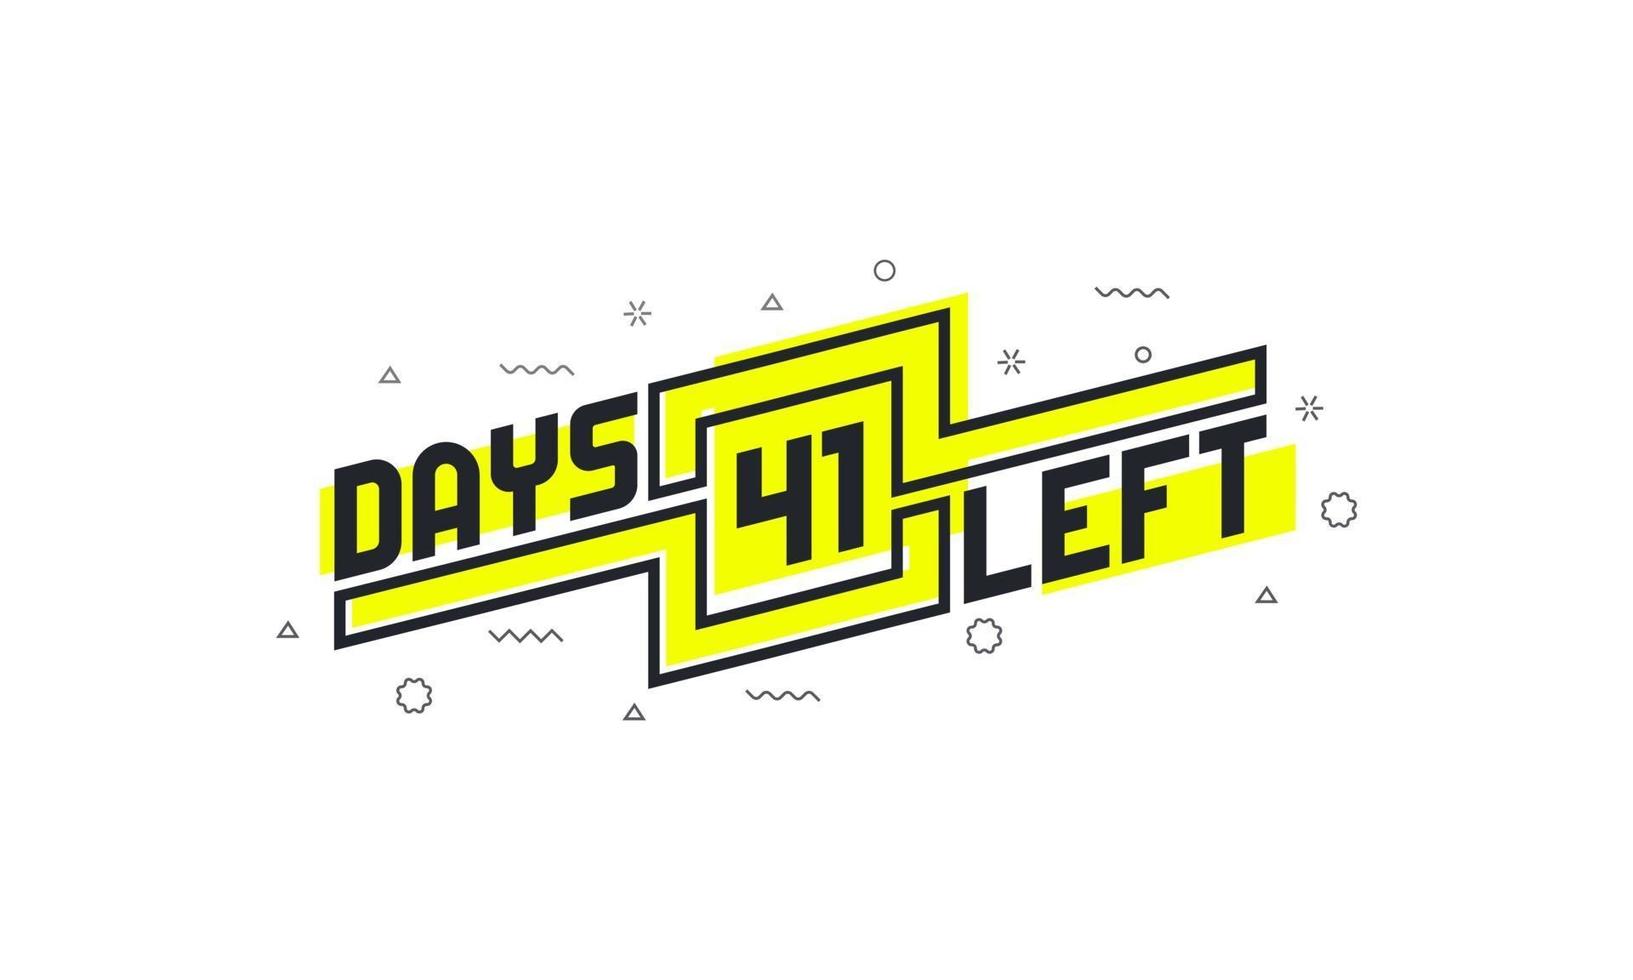 41 days left countdown sign for sale or promotion. vector